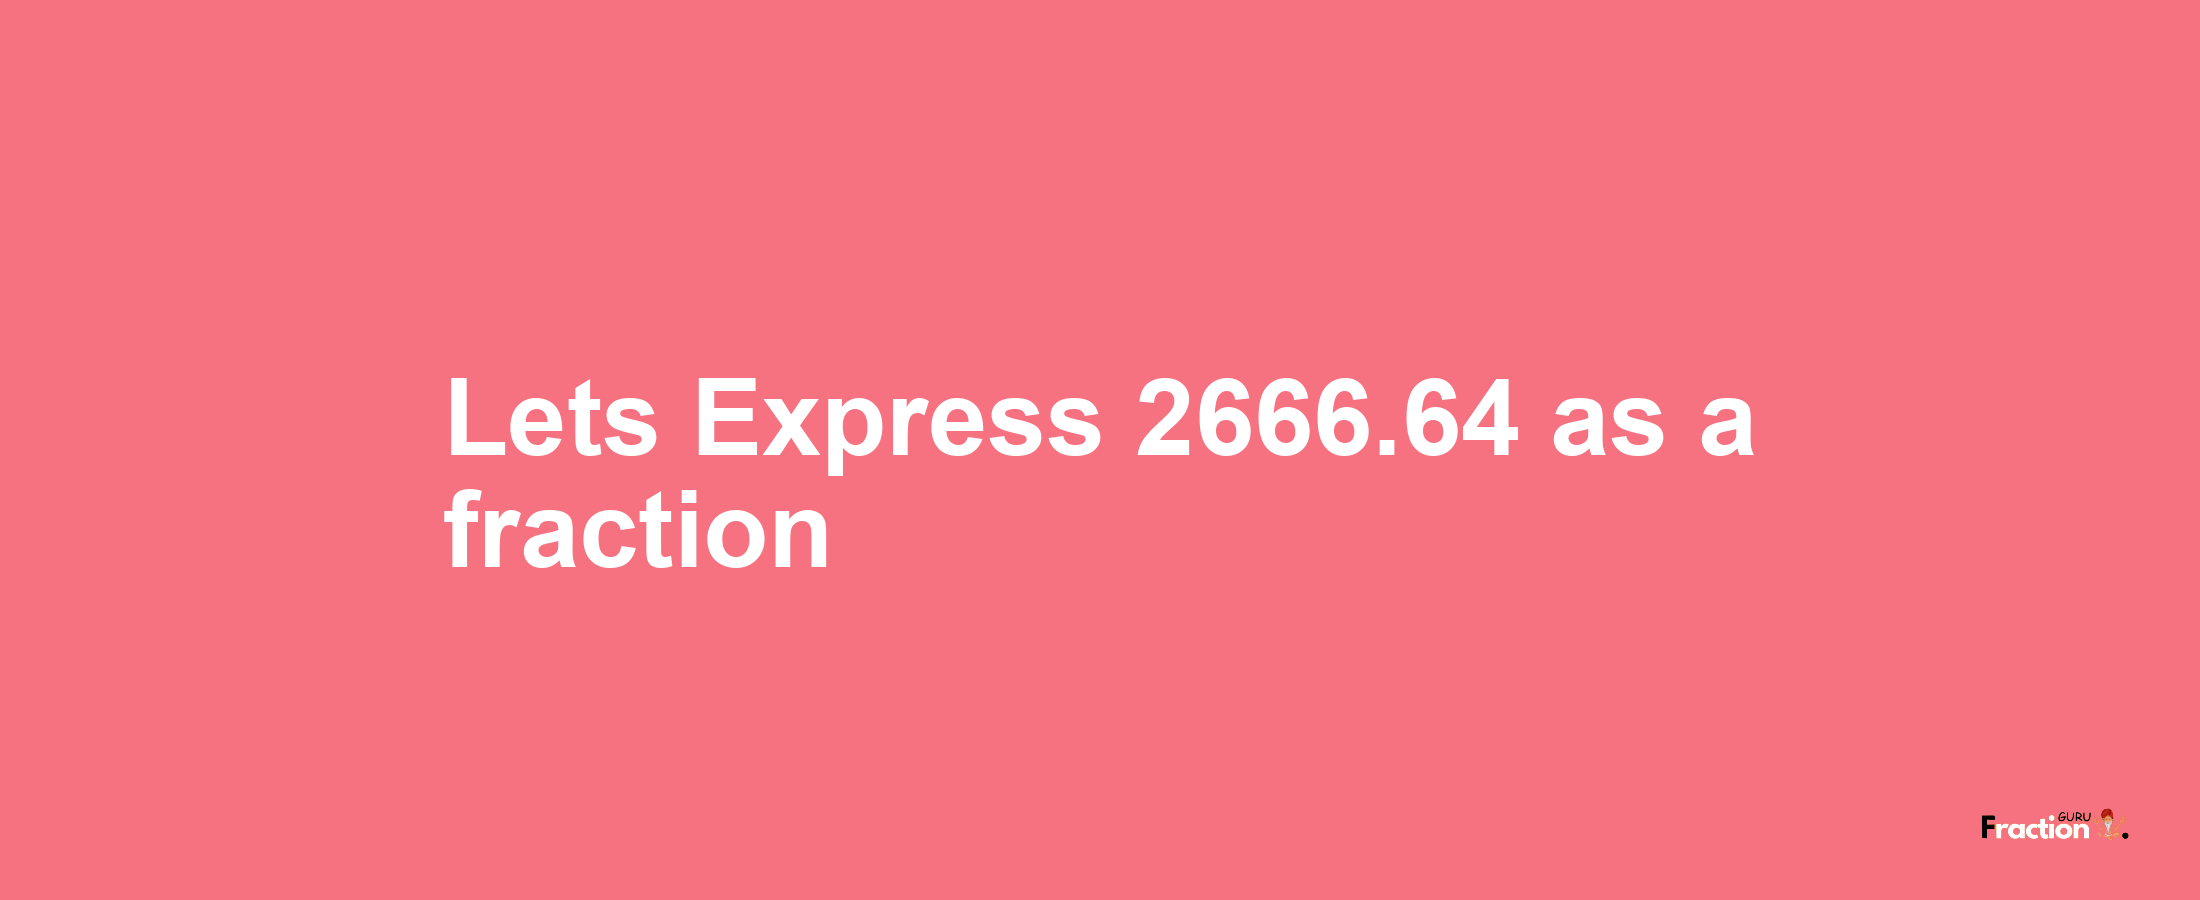 Lets Express 2666.64 as afraction